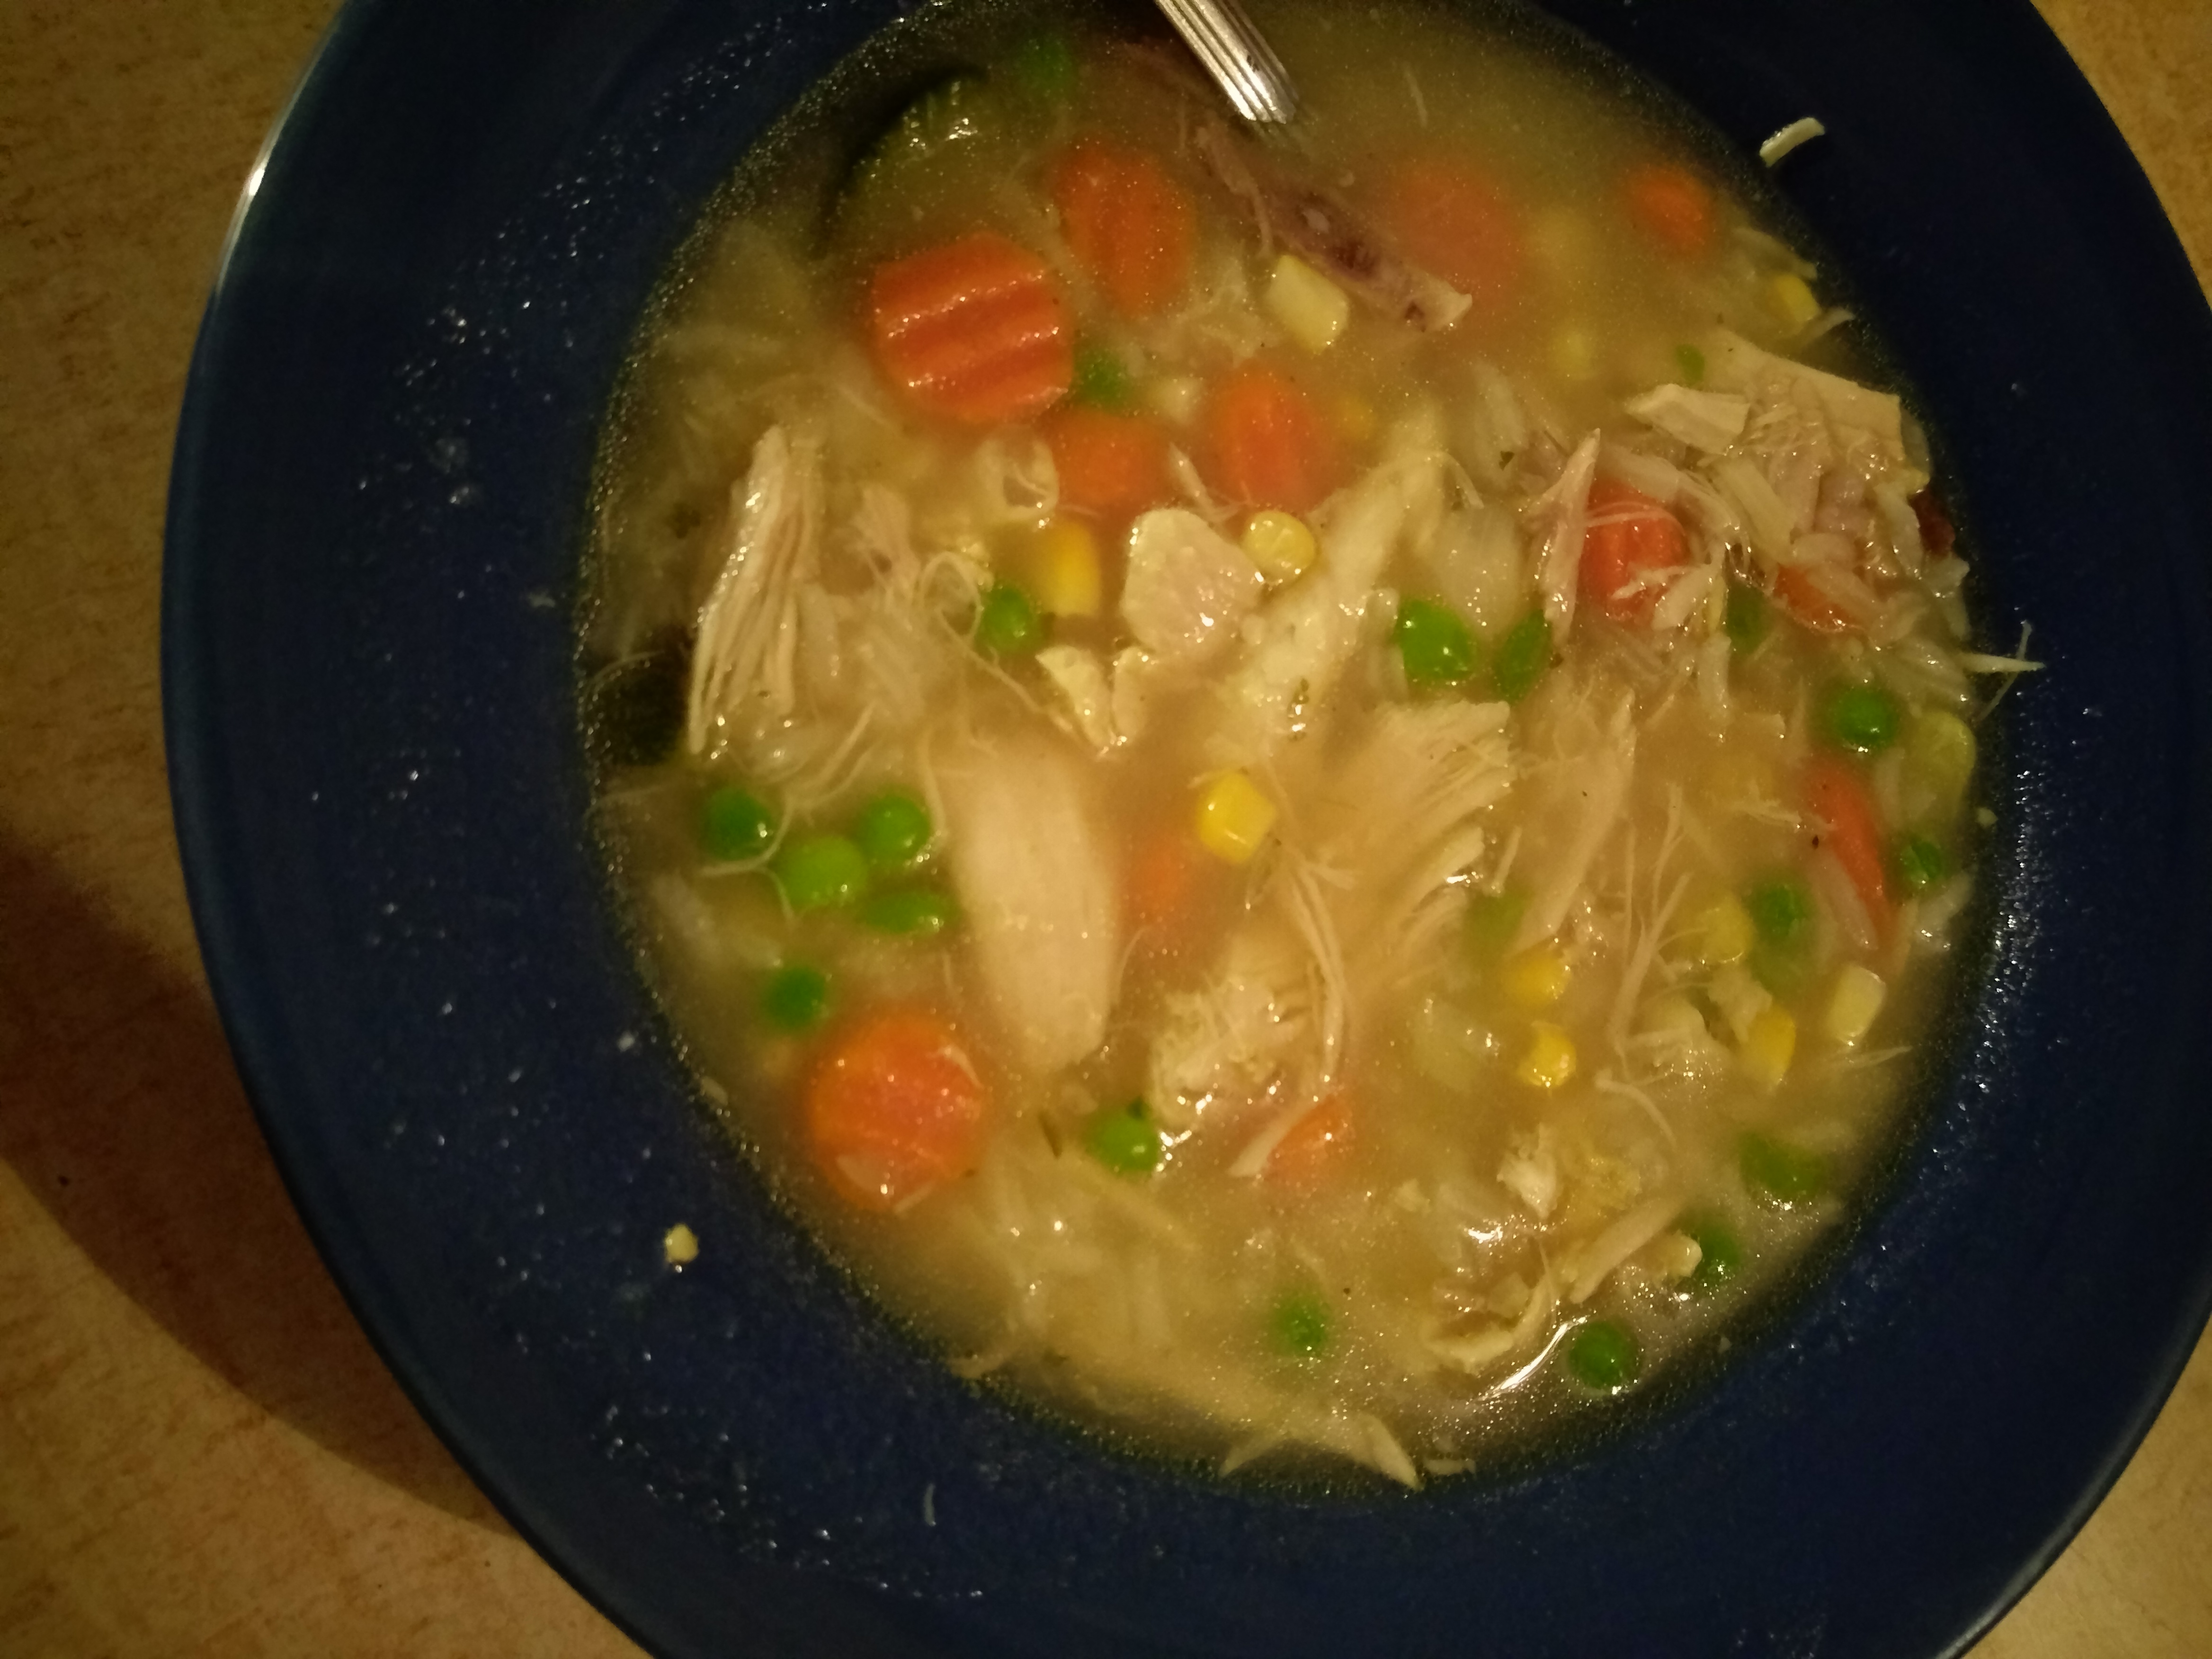 Day-After-Thanksgiving Turkey Carcass Soup 